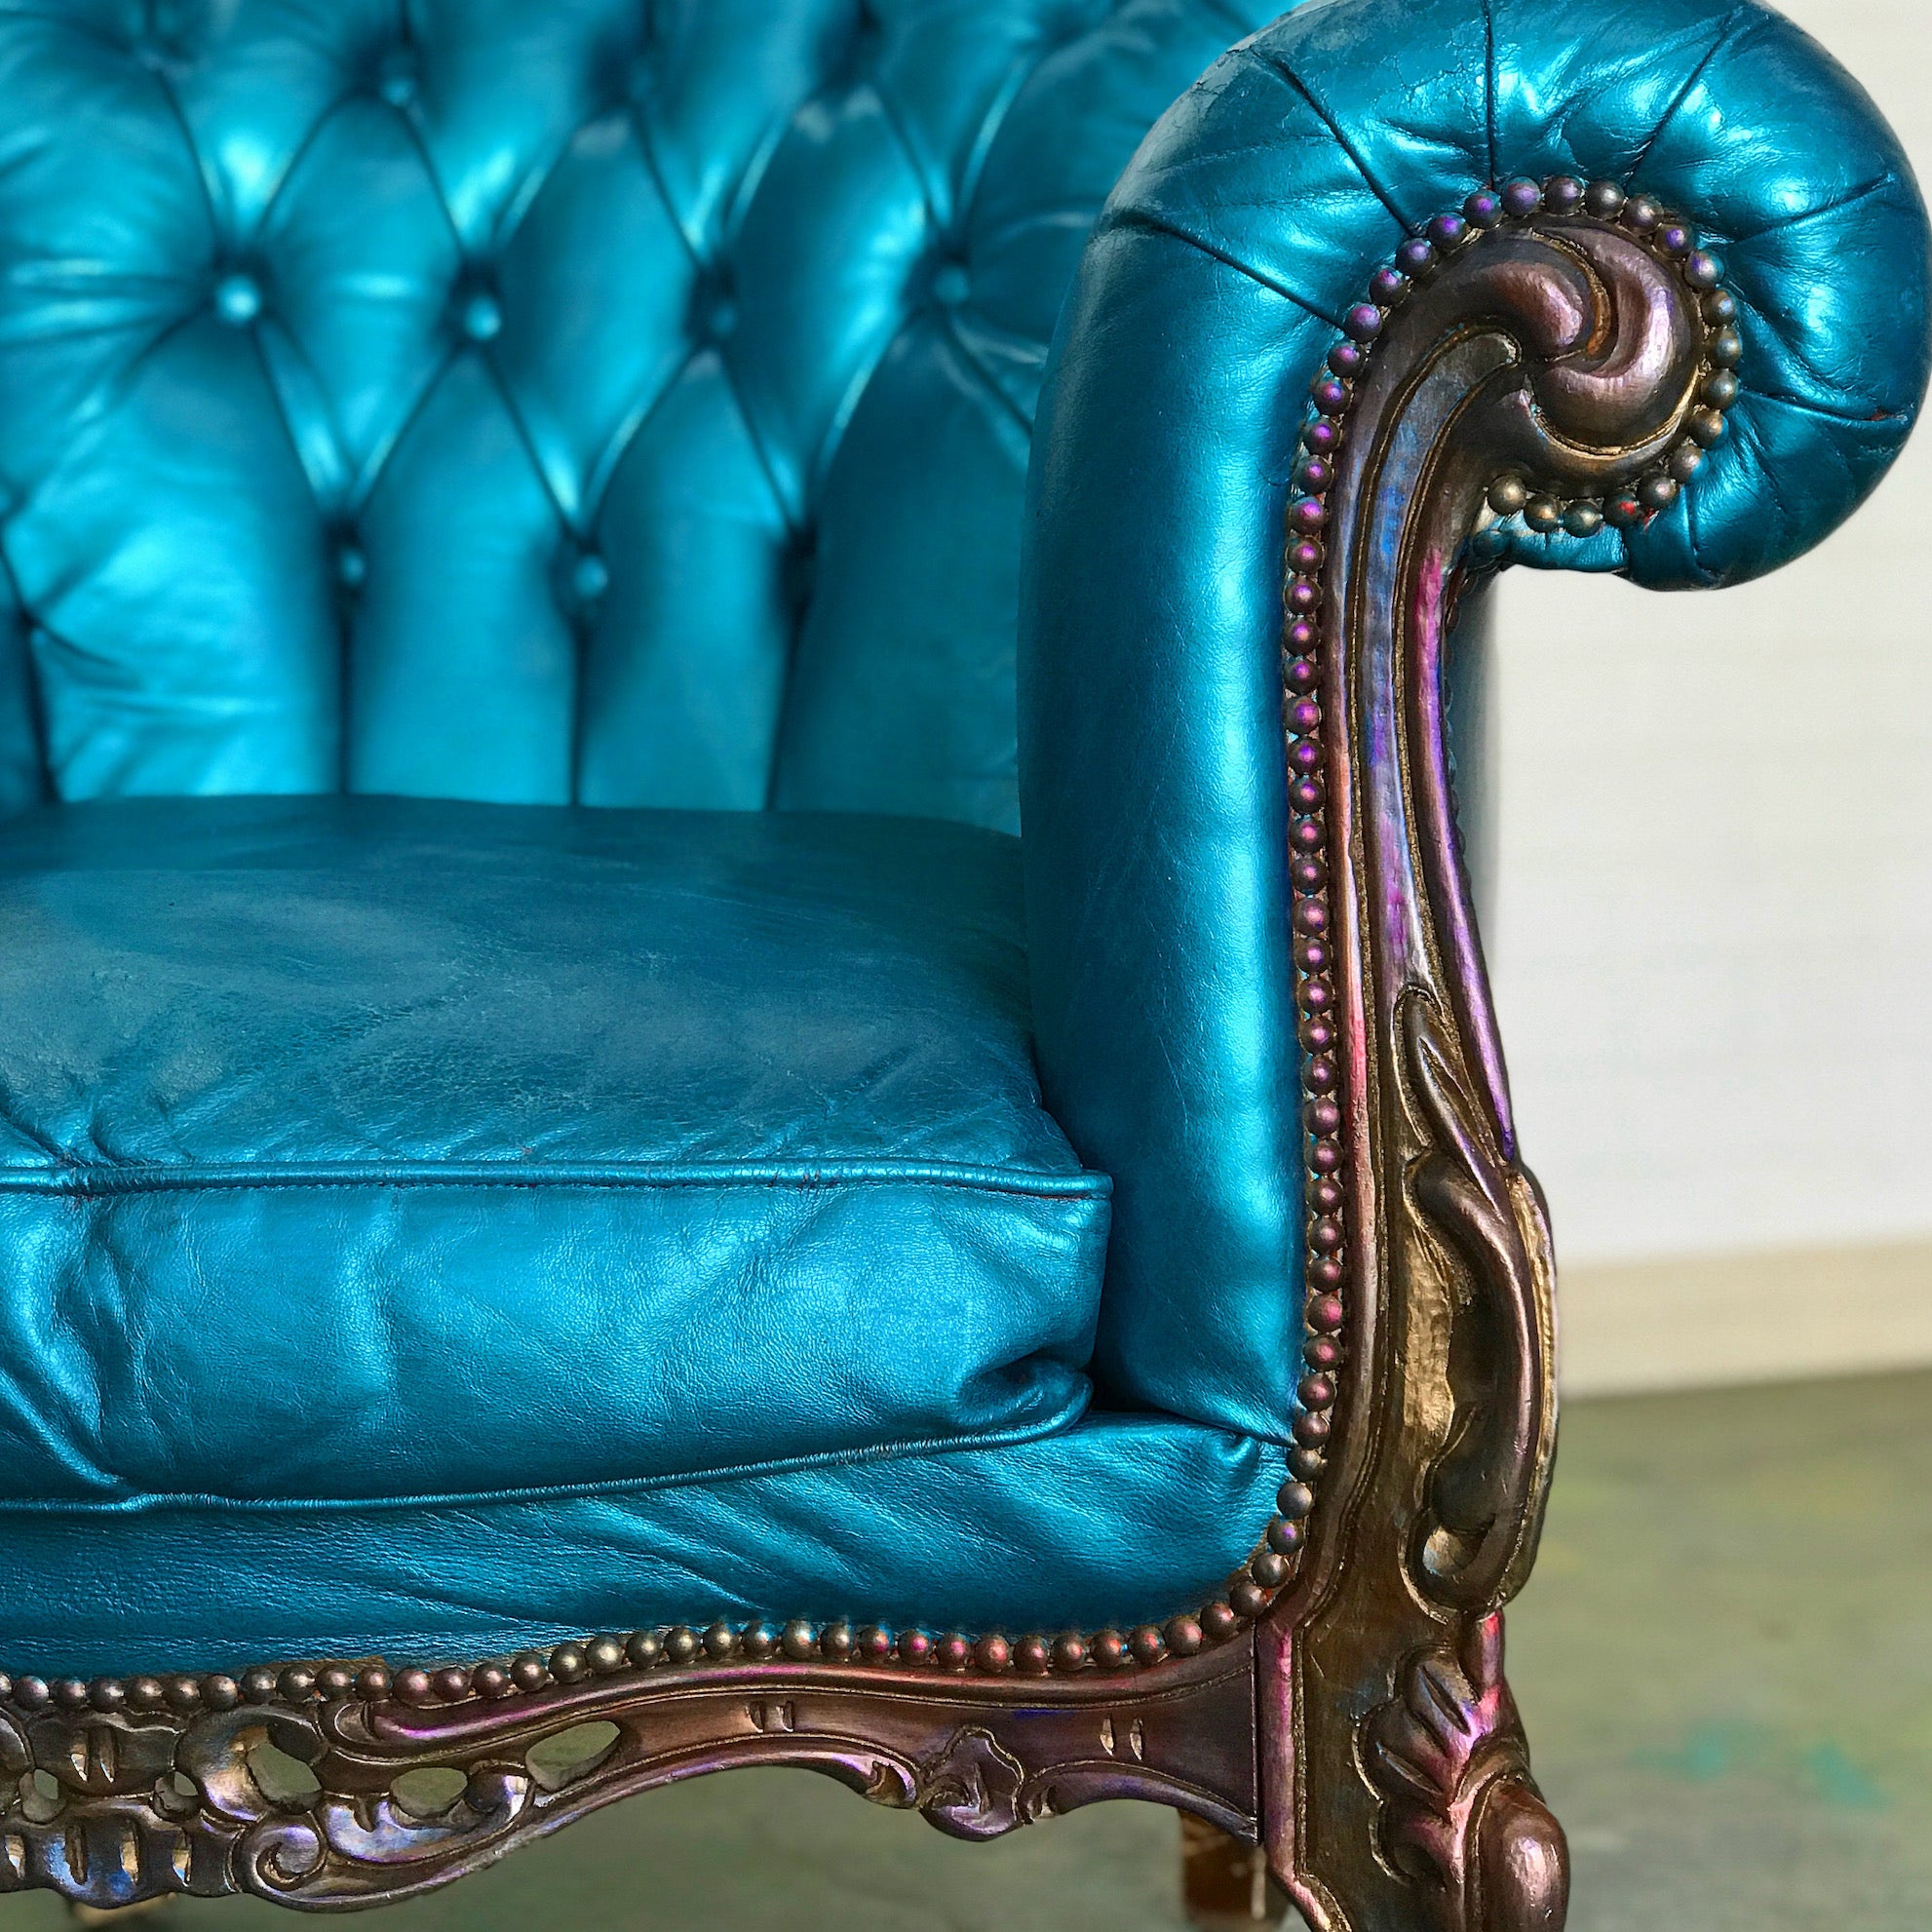 3 Ways to Care for Leather Furniture - wikiHow